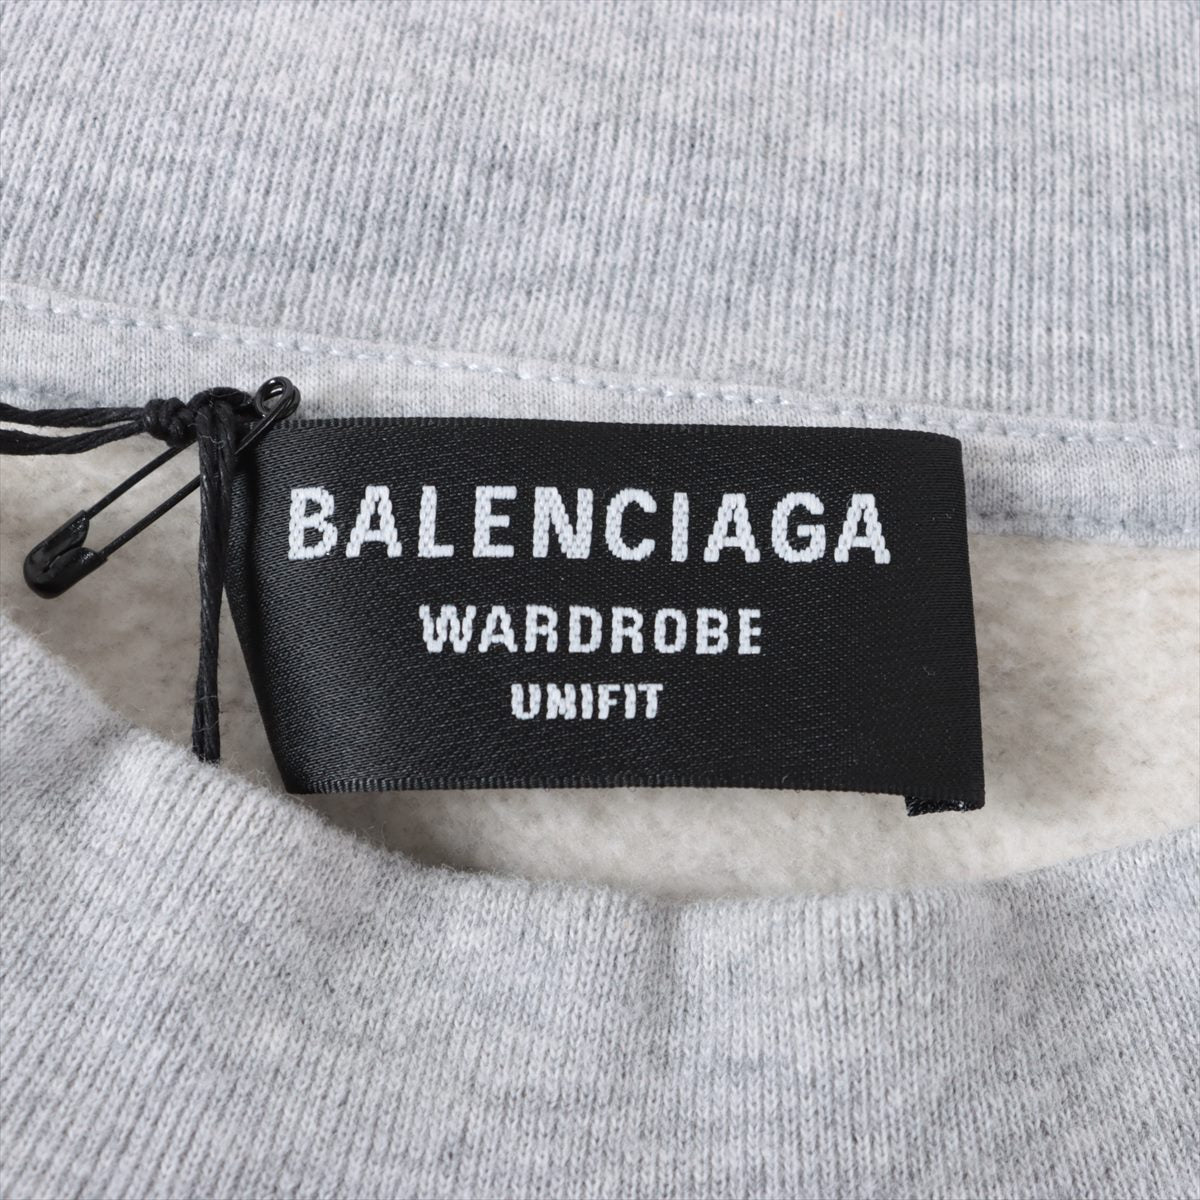 Balenciaga 21 years Cotton & polyester Basic knitted fabric S Men's Grey  671125  embroidered crewneck sweatshirt